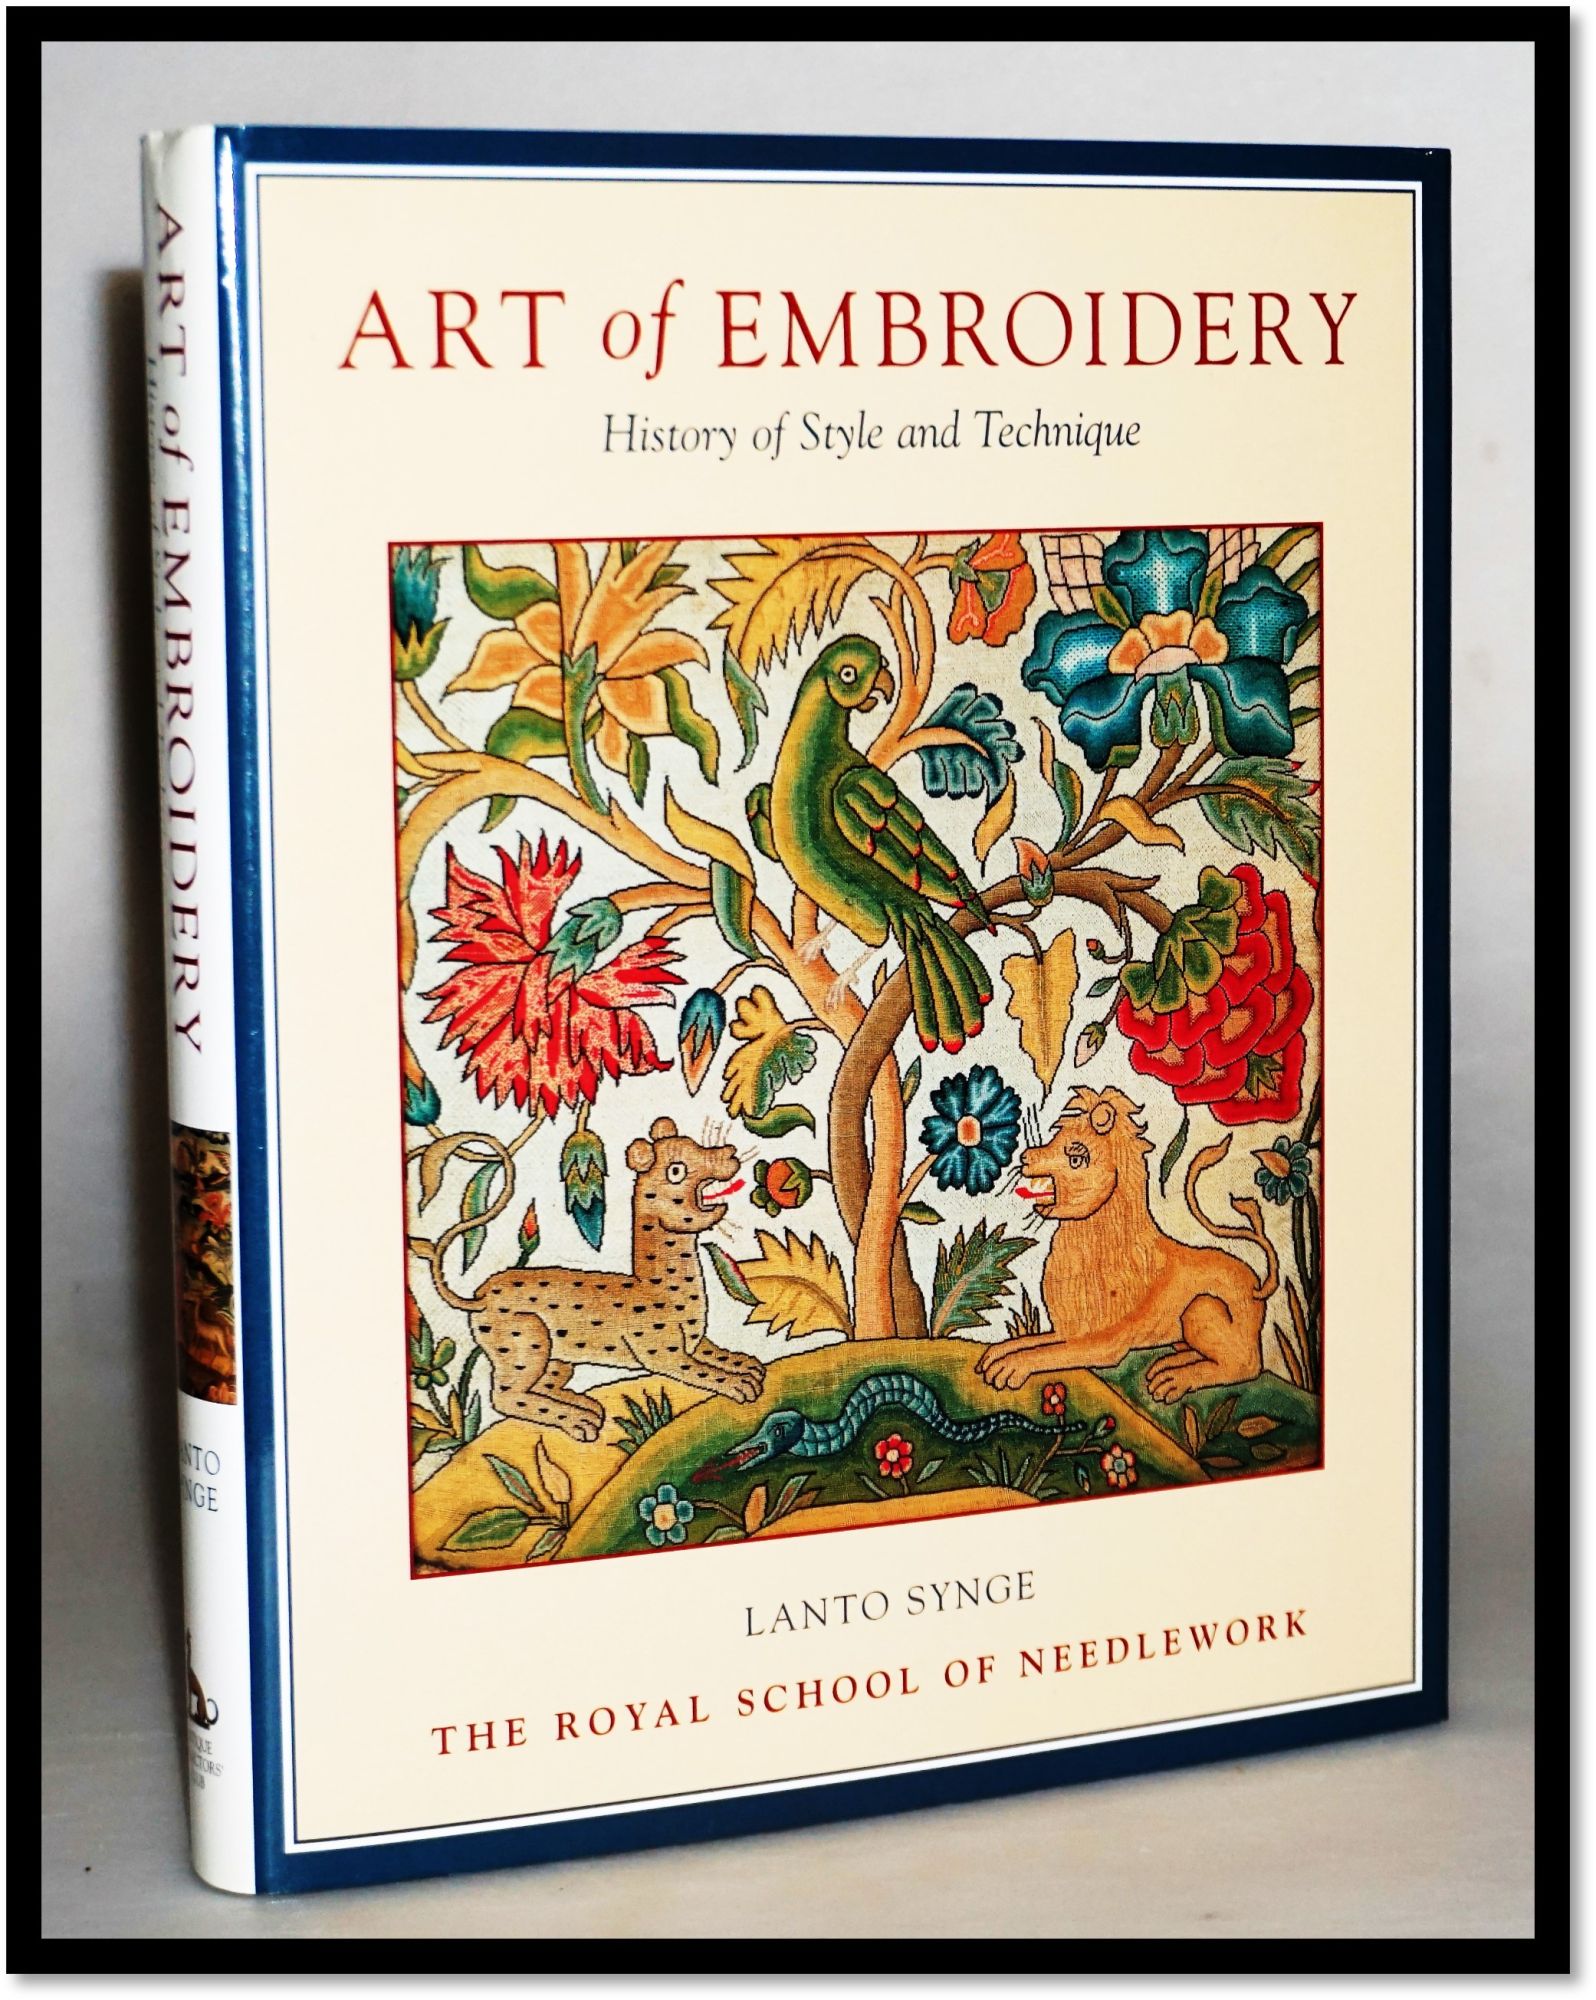 Art of Embroidery: History of Style and Technique, Lanto Synge